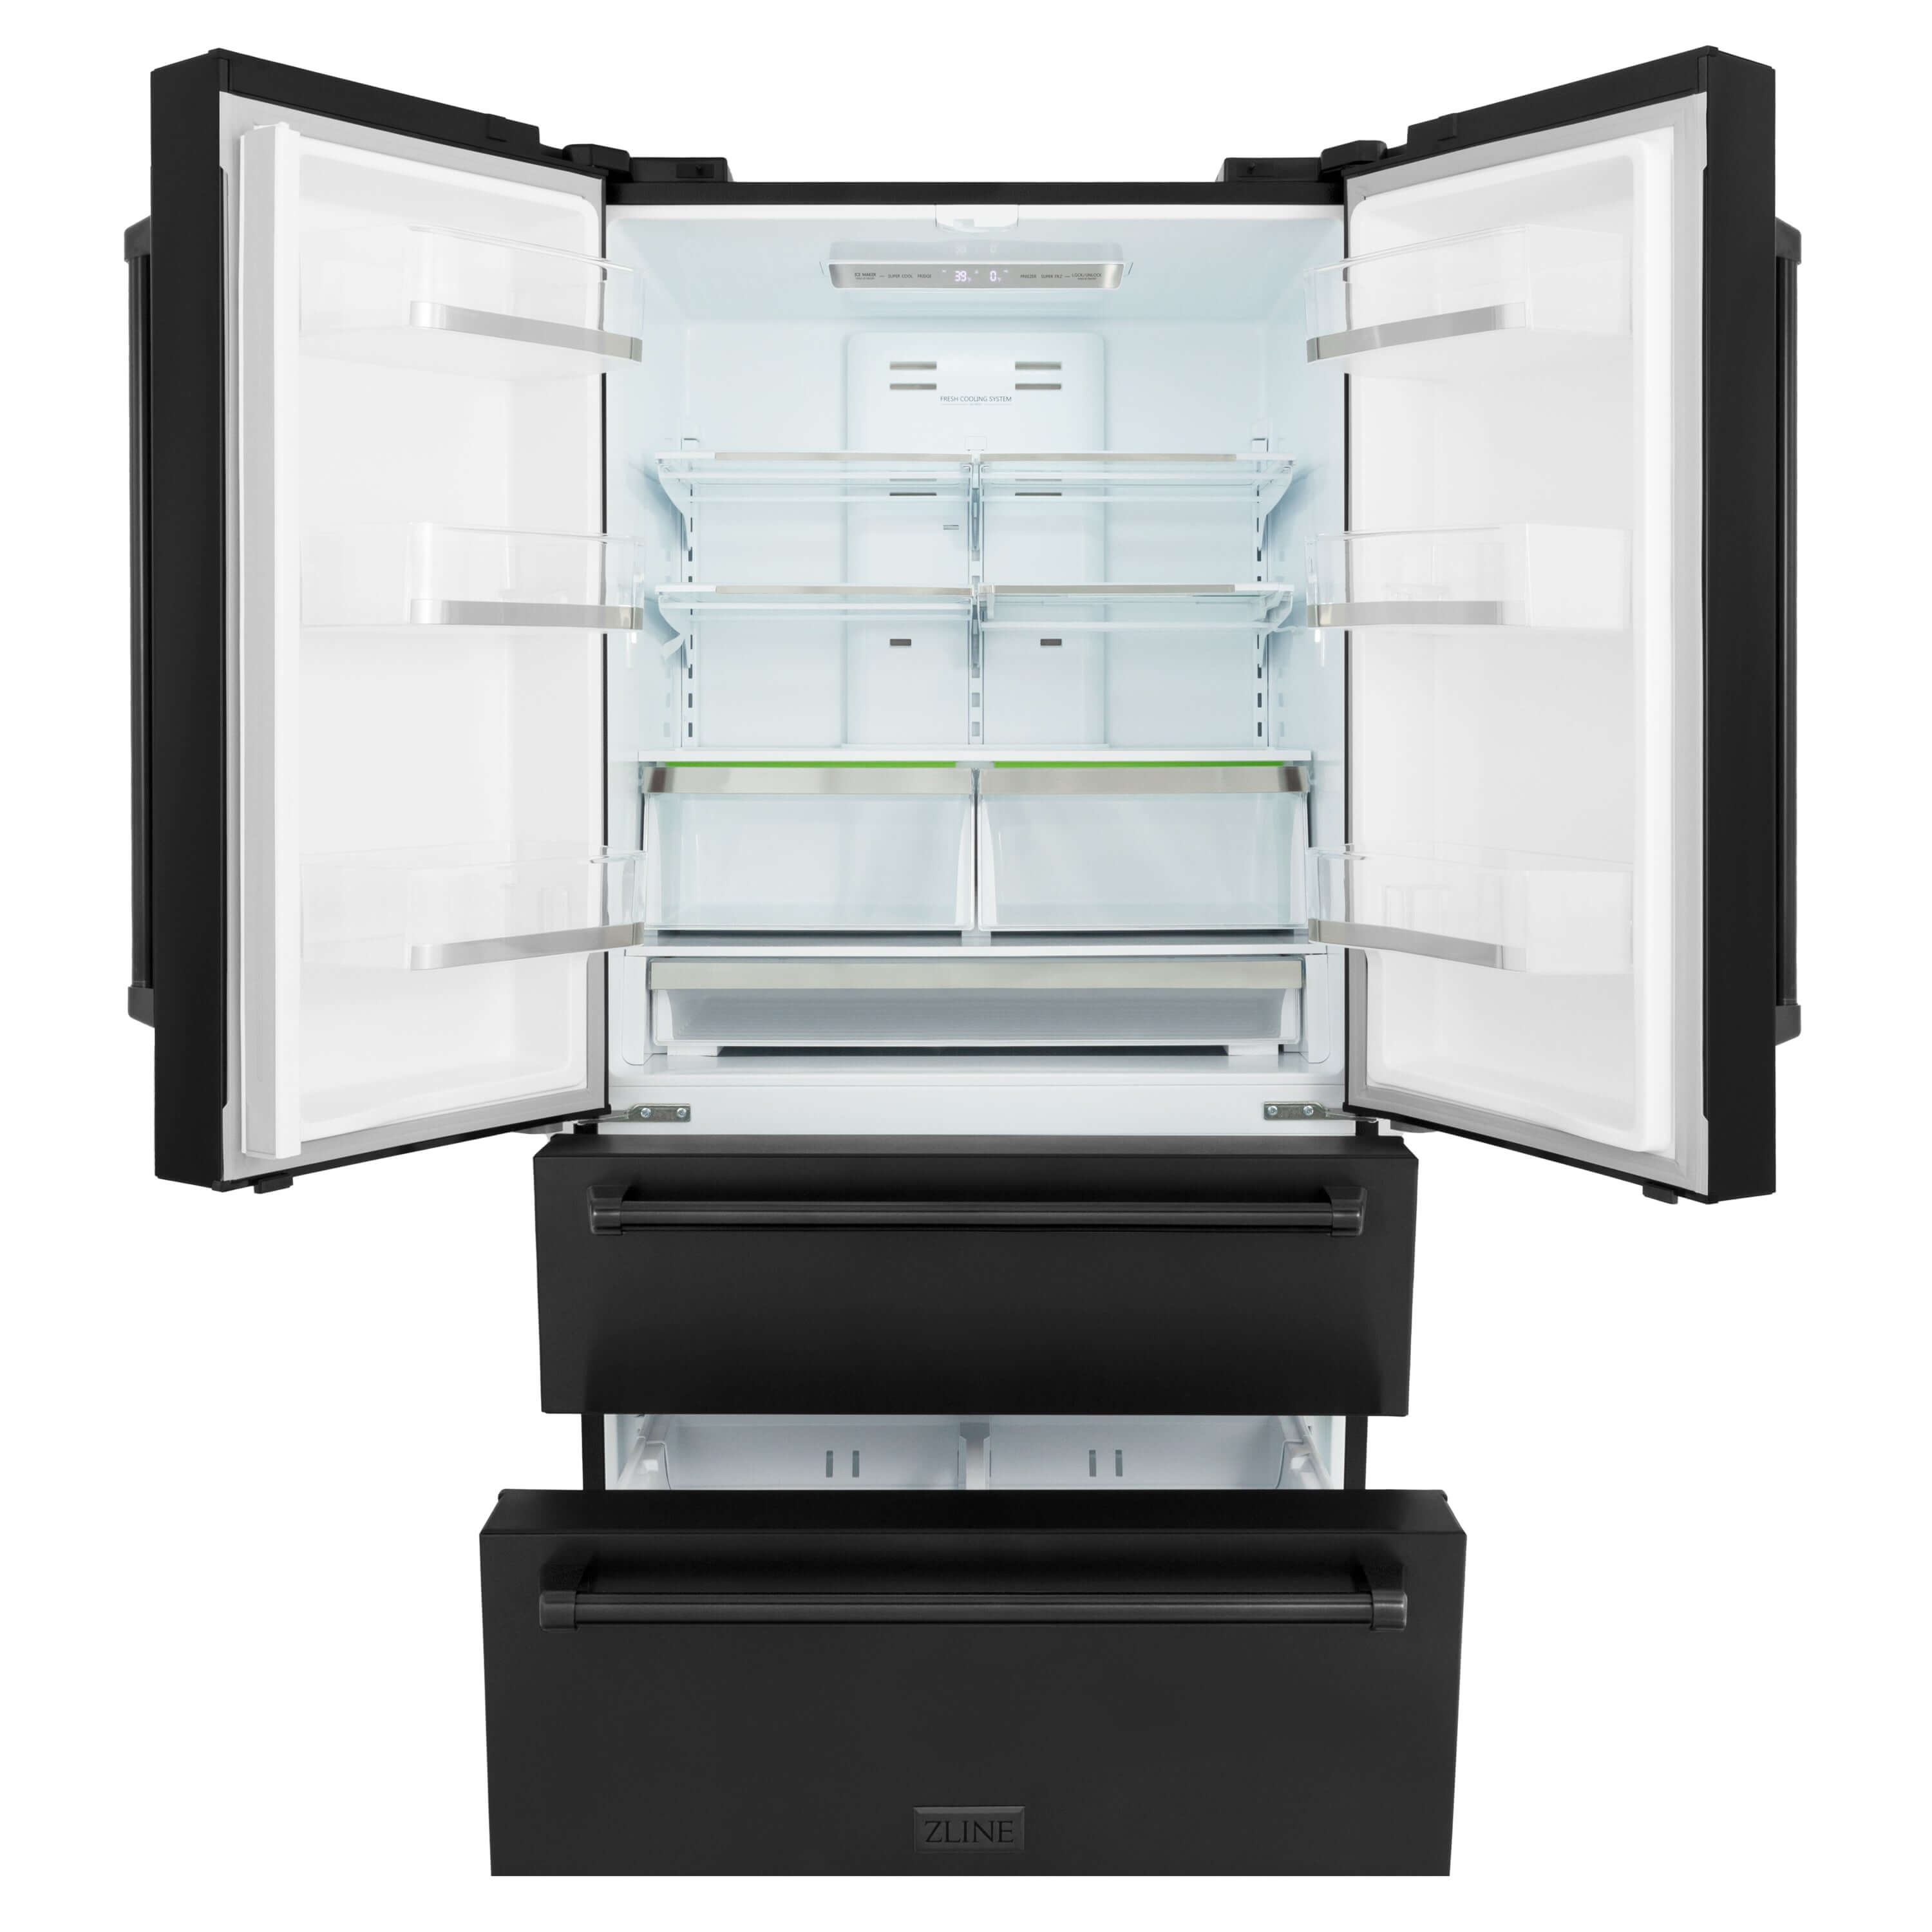 ZLINE 36 in. Freestanding French Door Refrigerator with Ice Maker in Black Stainless Steel (RFM-36-BS) front, refrigeration compartment and bottom freezers open.